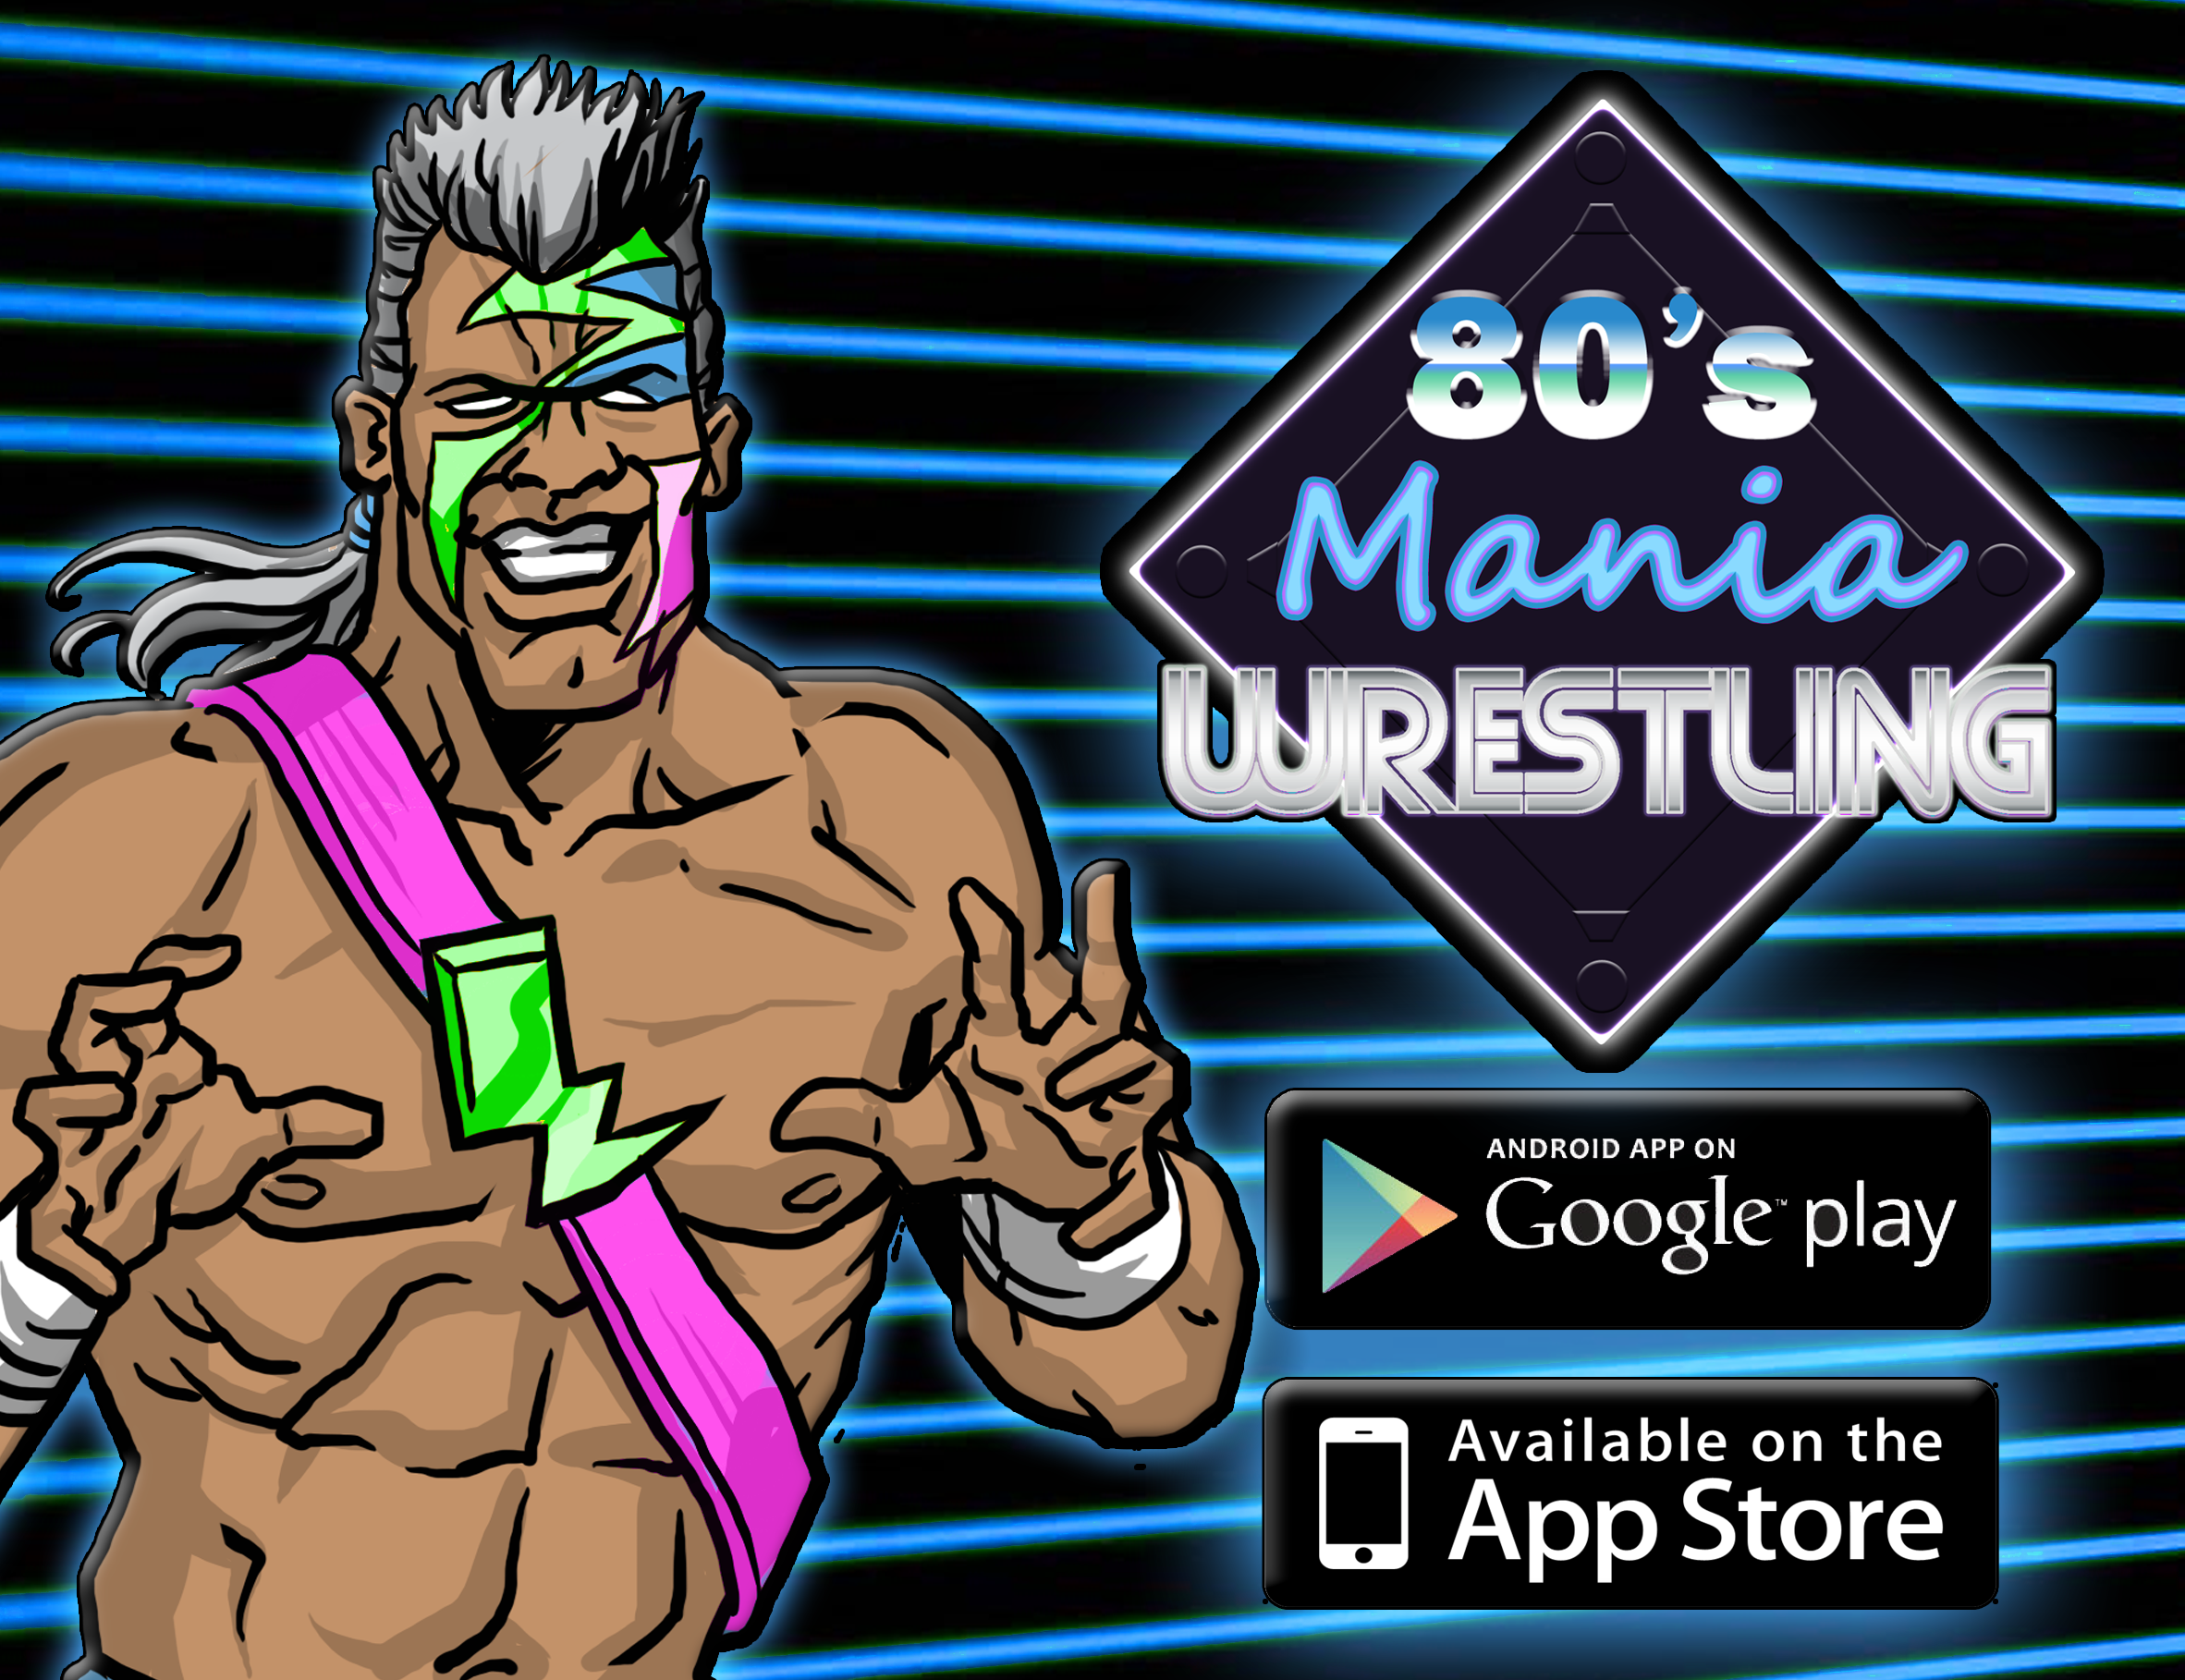 “80’s Mania Wrestling” available now!